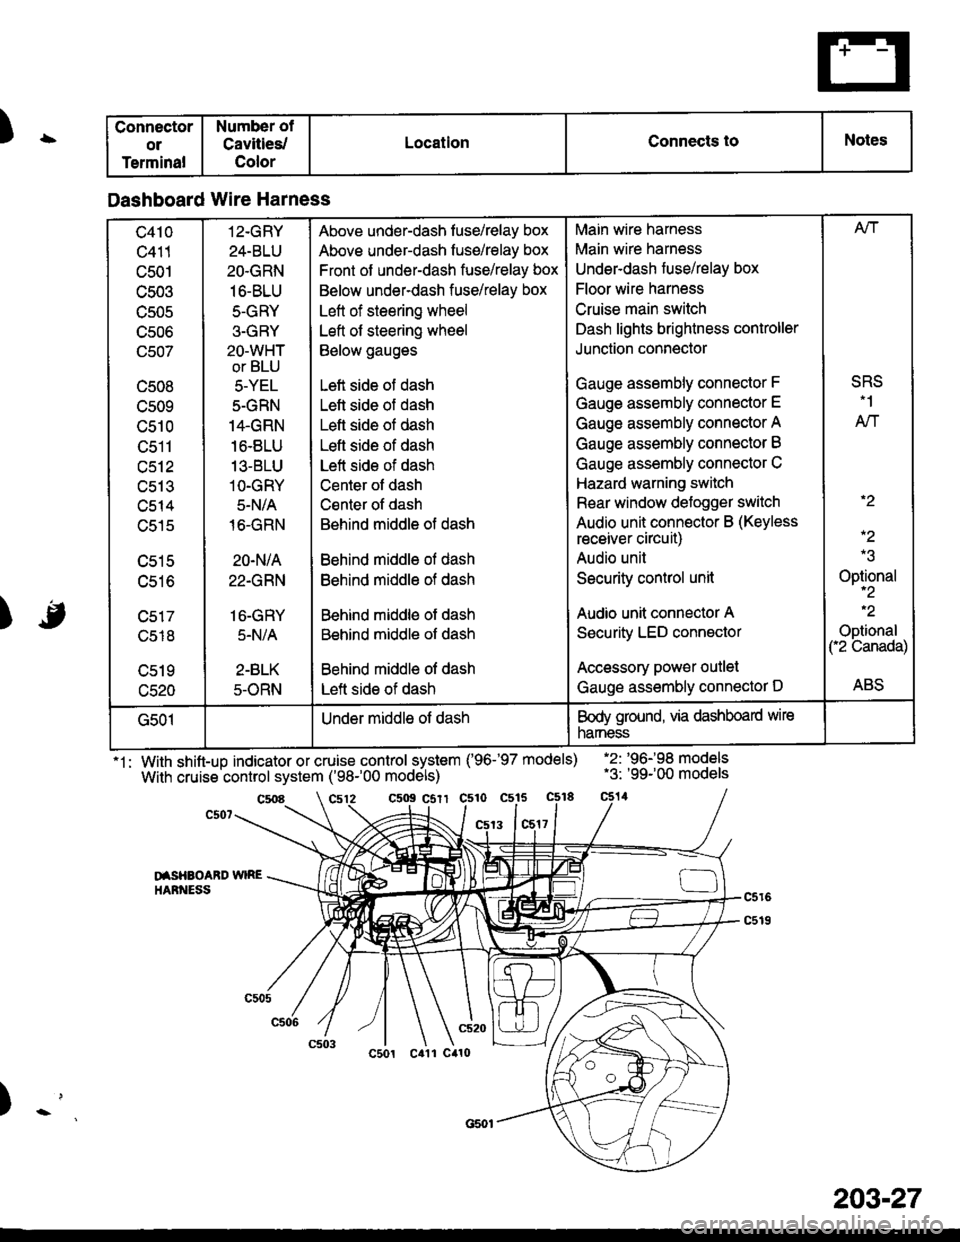 HONDA CIVIC 1996 6.G Service Manual )\
) -,
.
1: With shift-up indicator or cruise control system (96-97 models)
With cruise control system (98-00 models)
.2: 96198 models.3: 99-00 models
c5o9 csrr c510 c515
13 1c517
DISHAOABD 